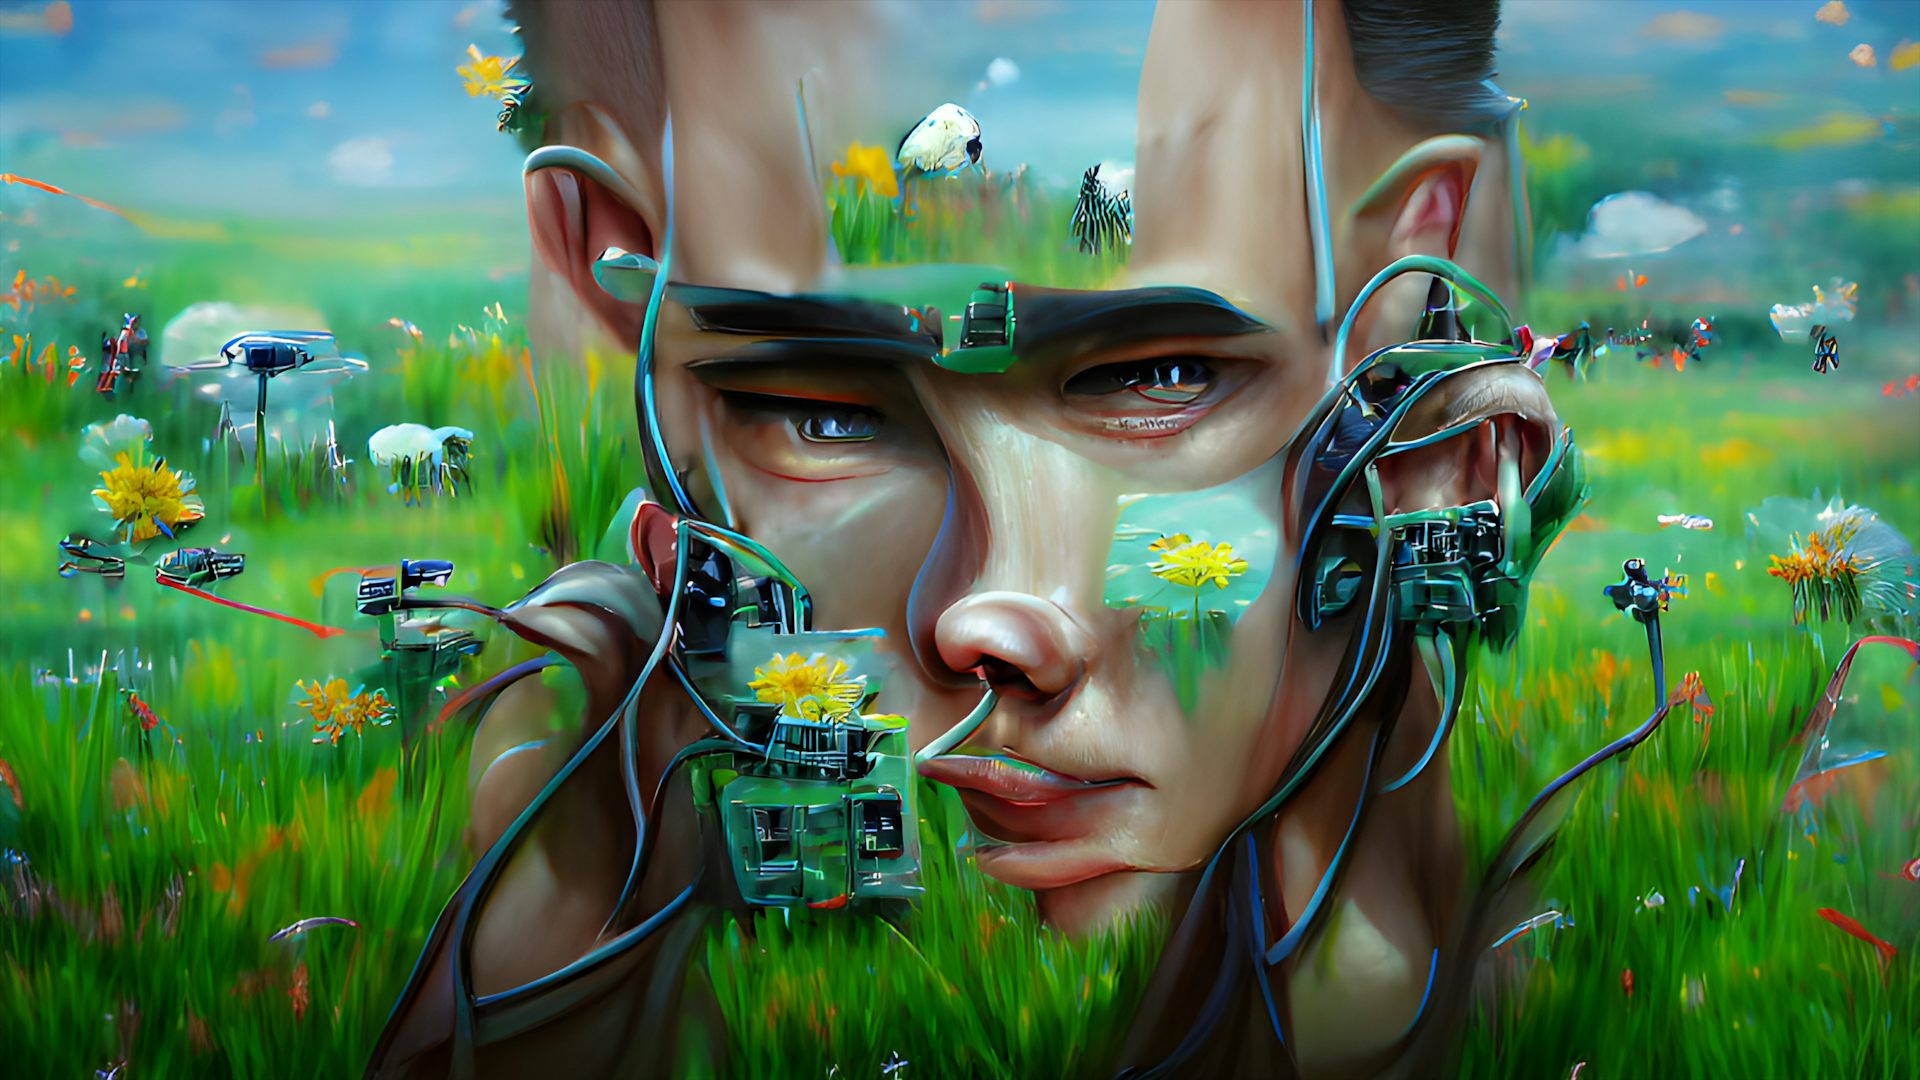 Computer generated image made to look like a painting of a face with wires spilling out of its head surrounded by a field of grass and flowers.